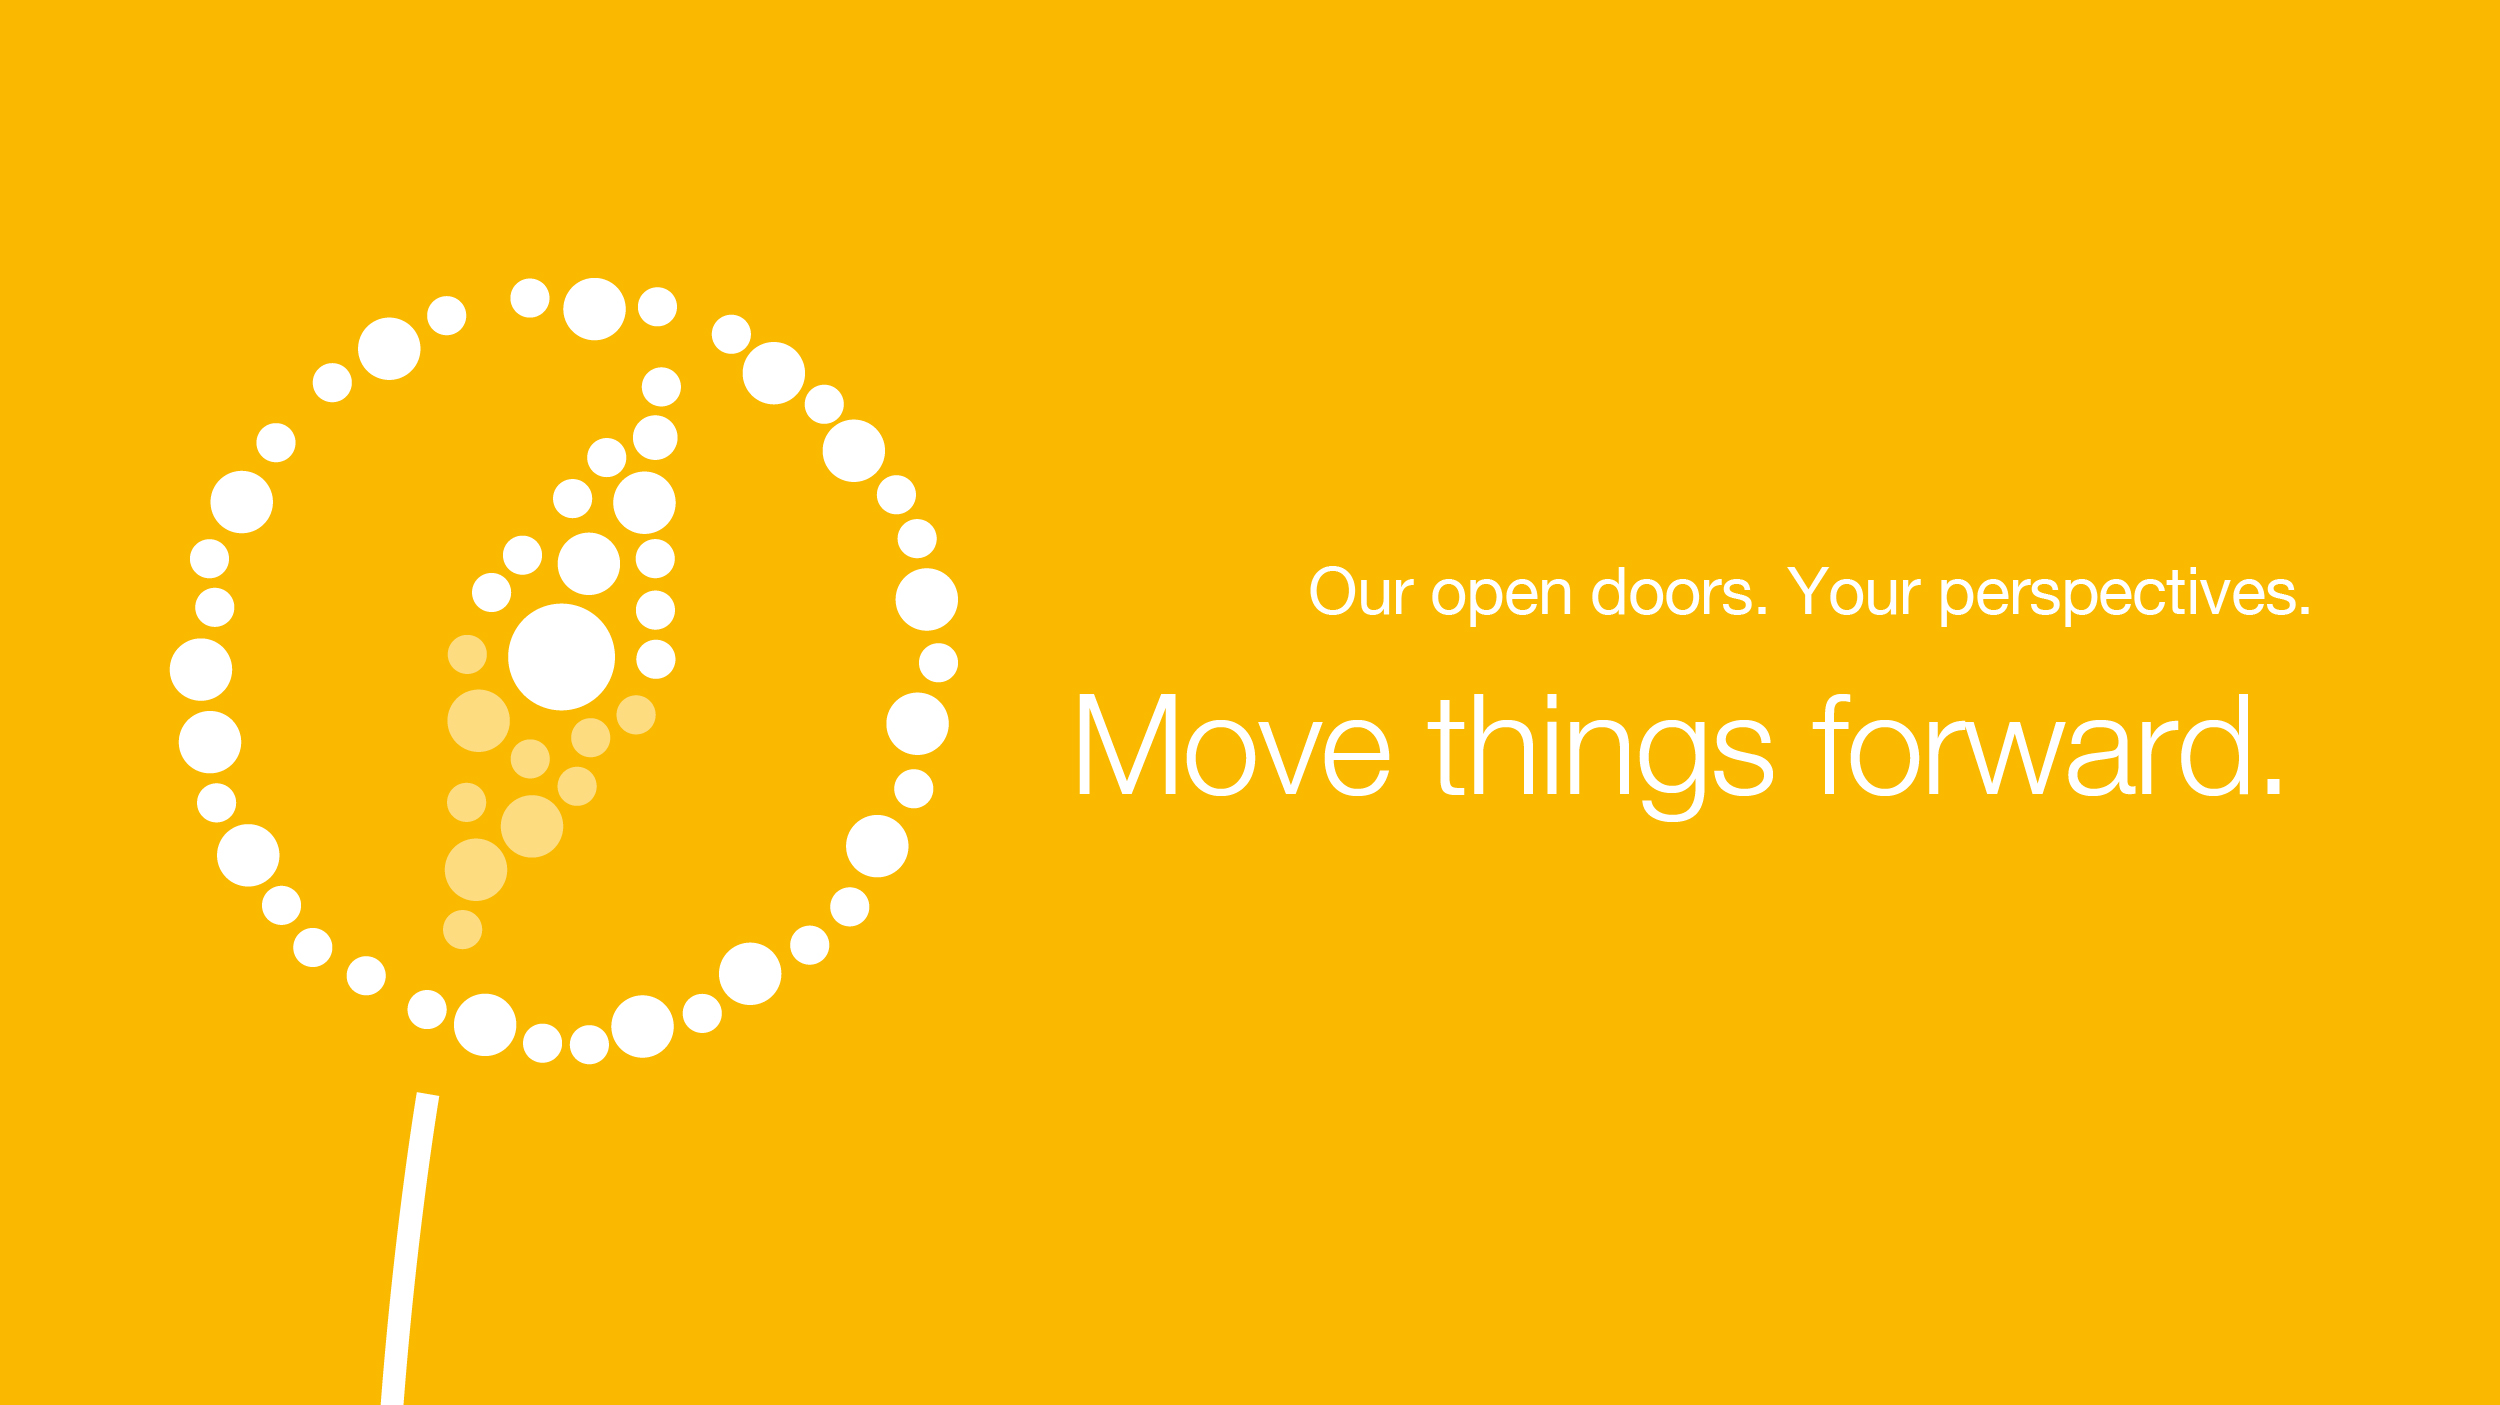 Dandelion made of icons as a globe, with adjacent slogan: Our open doors Your perspectives